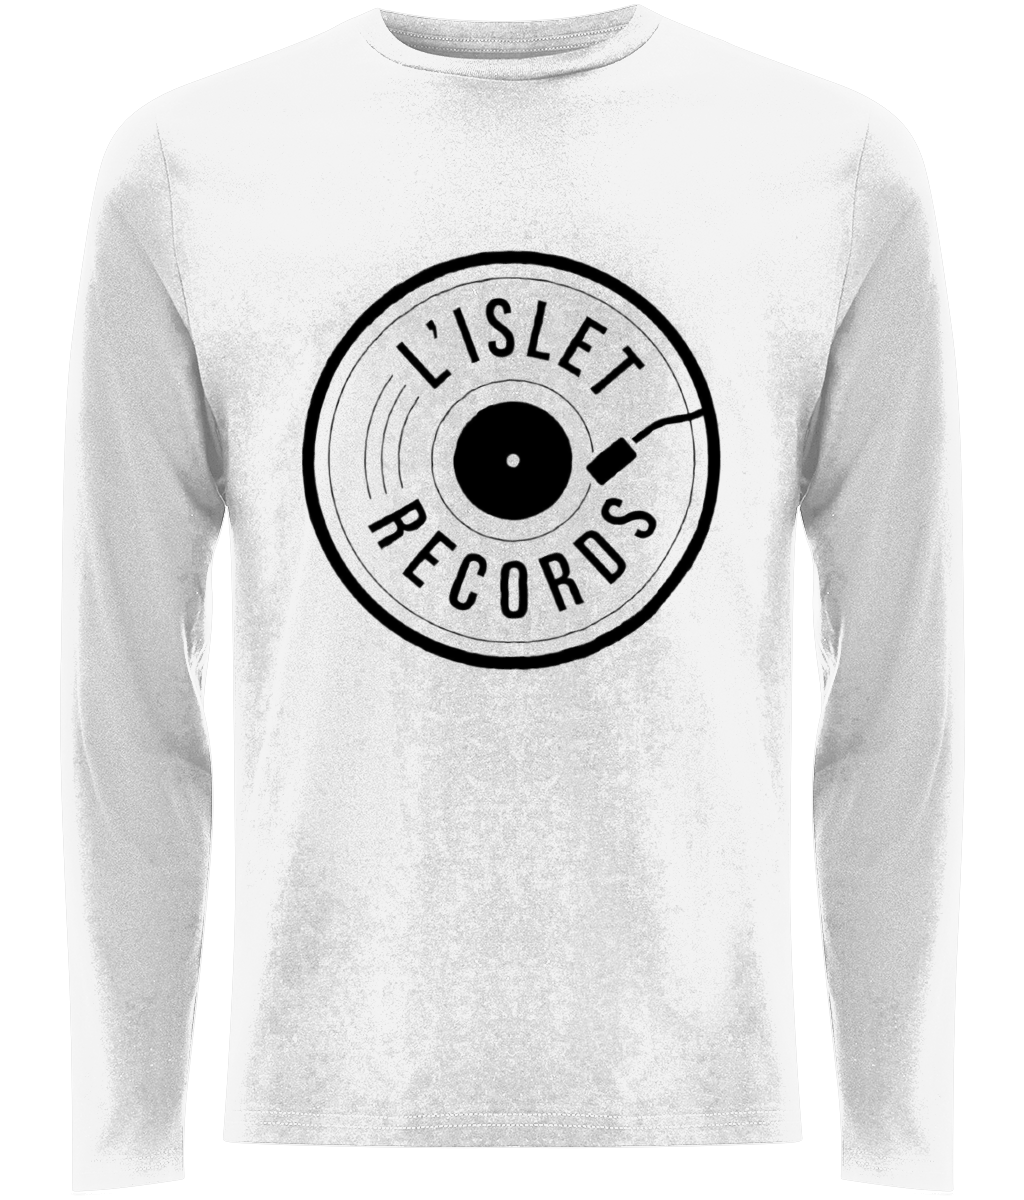 L'islet records logo in black on white long sleeve                100% Combed Organic Cotton Jersey 4oz/ 155g  Sizes Extra small to 2XL                 